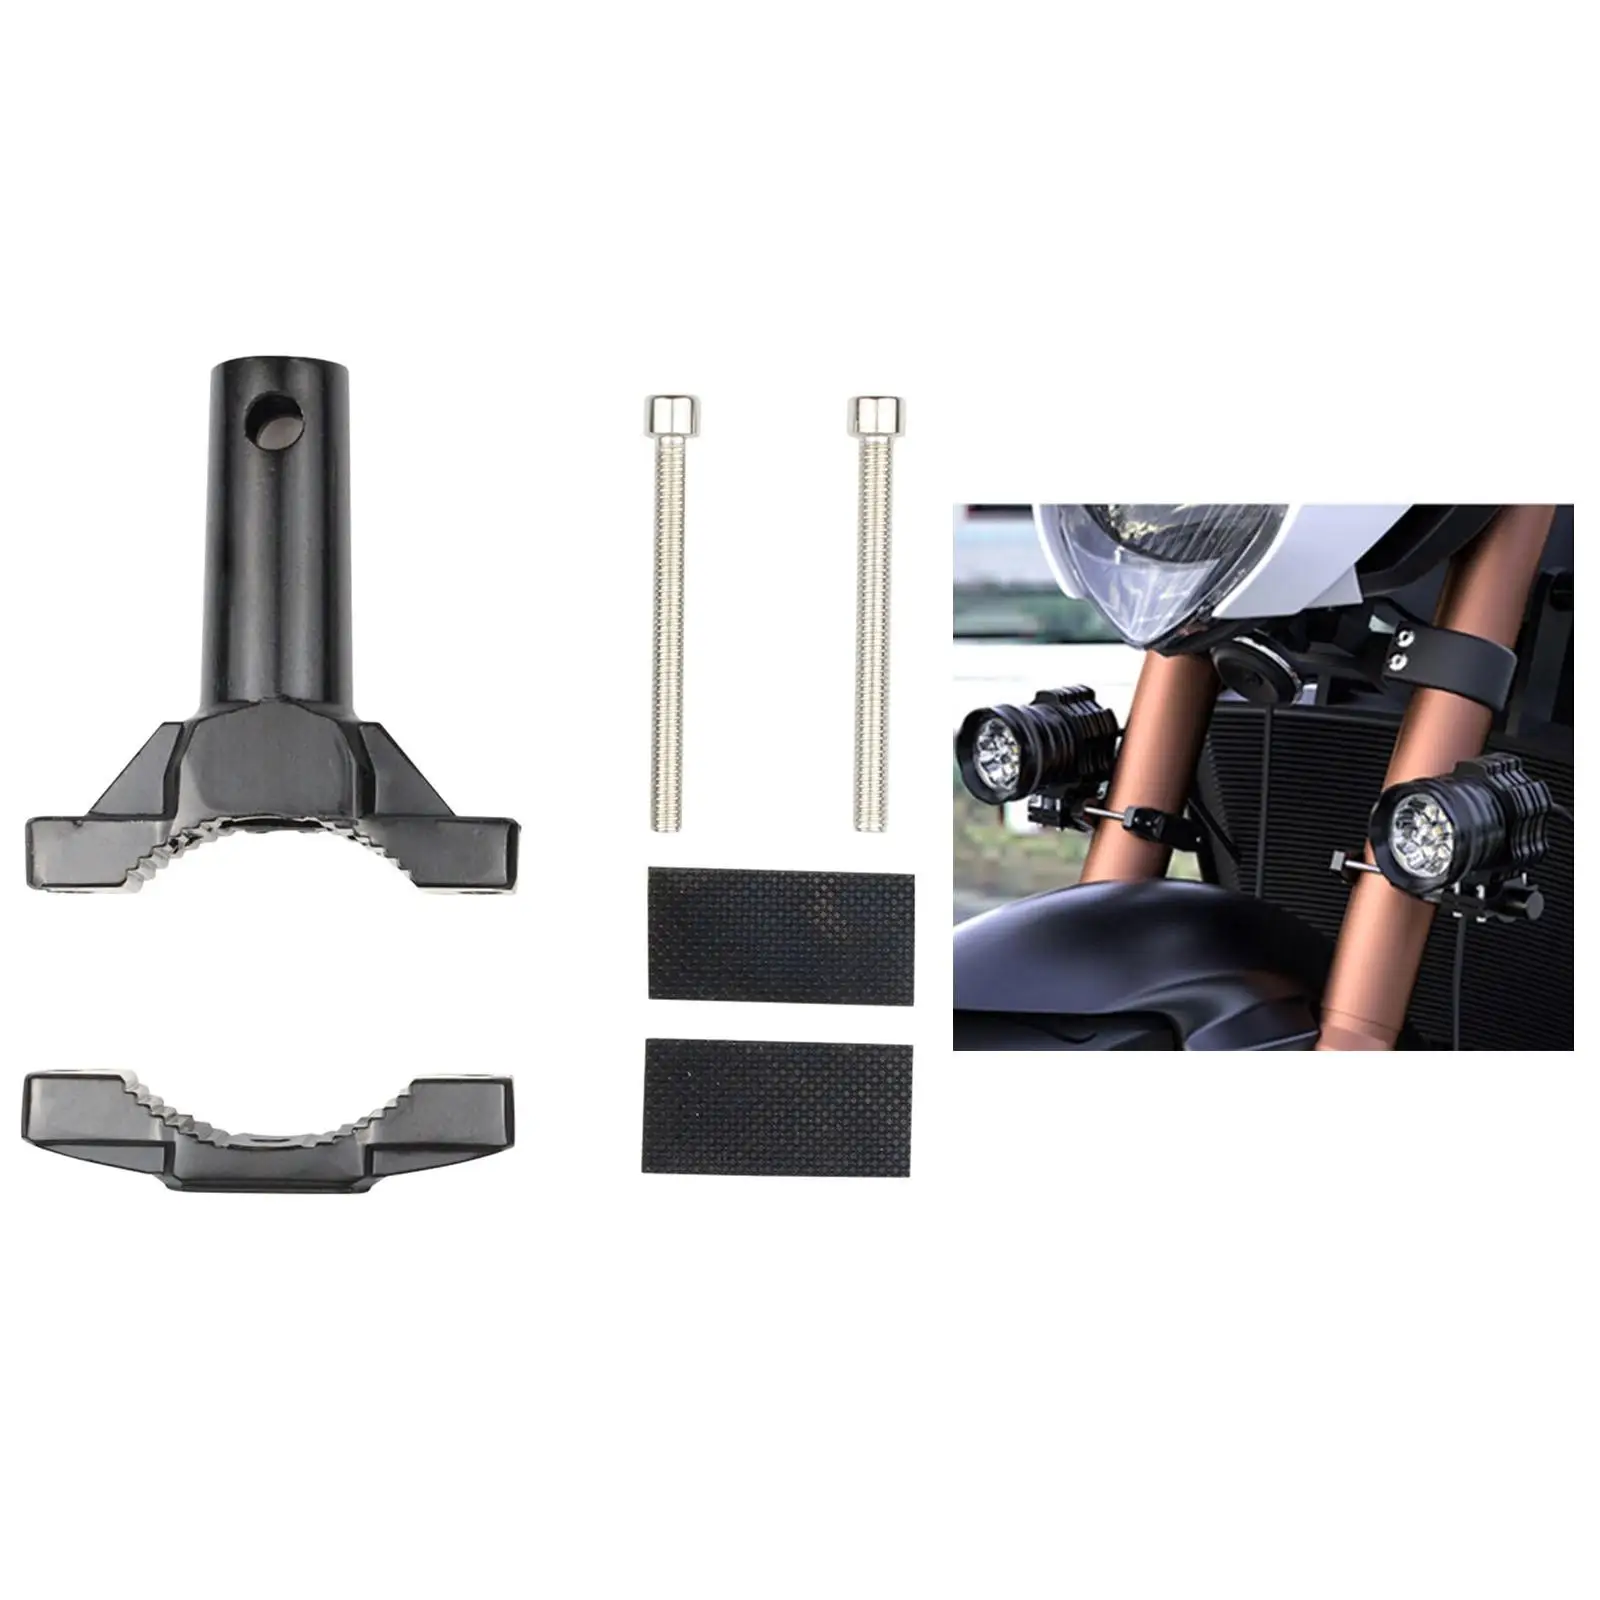 Mount Bracket Modified  Support Mounting Brackets for Motorcycle Bumper